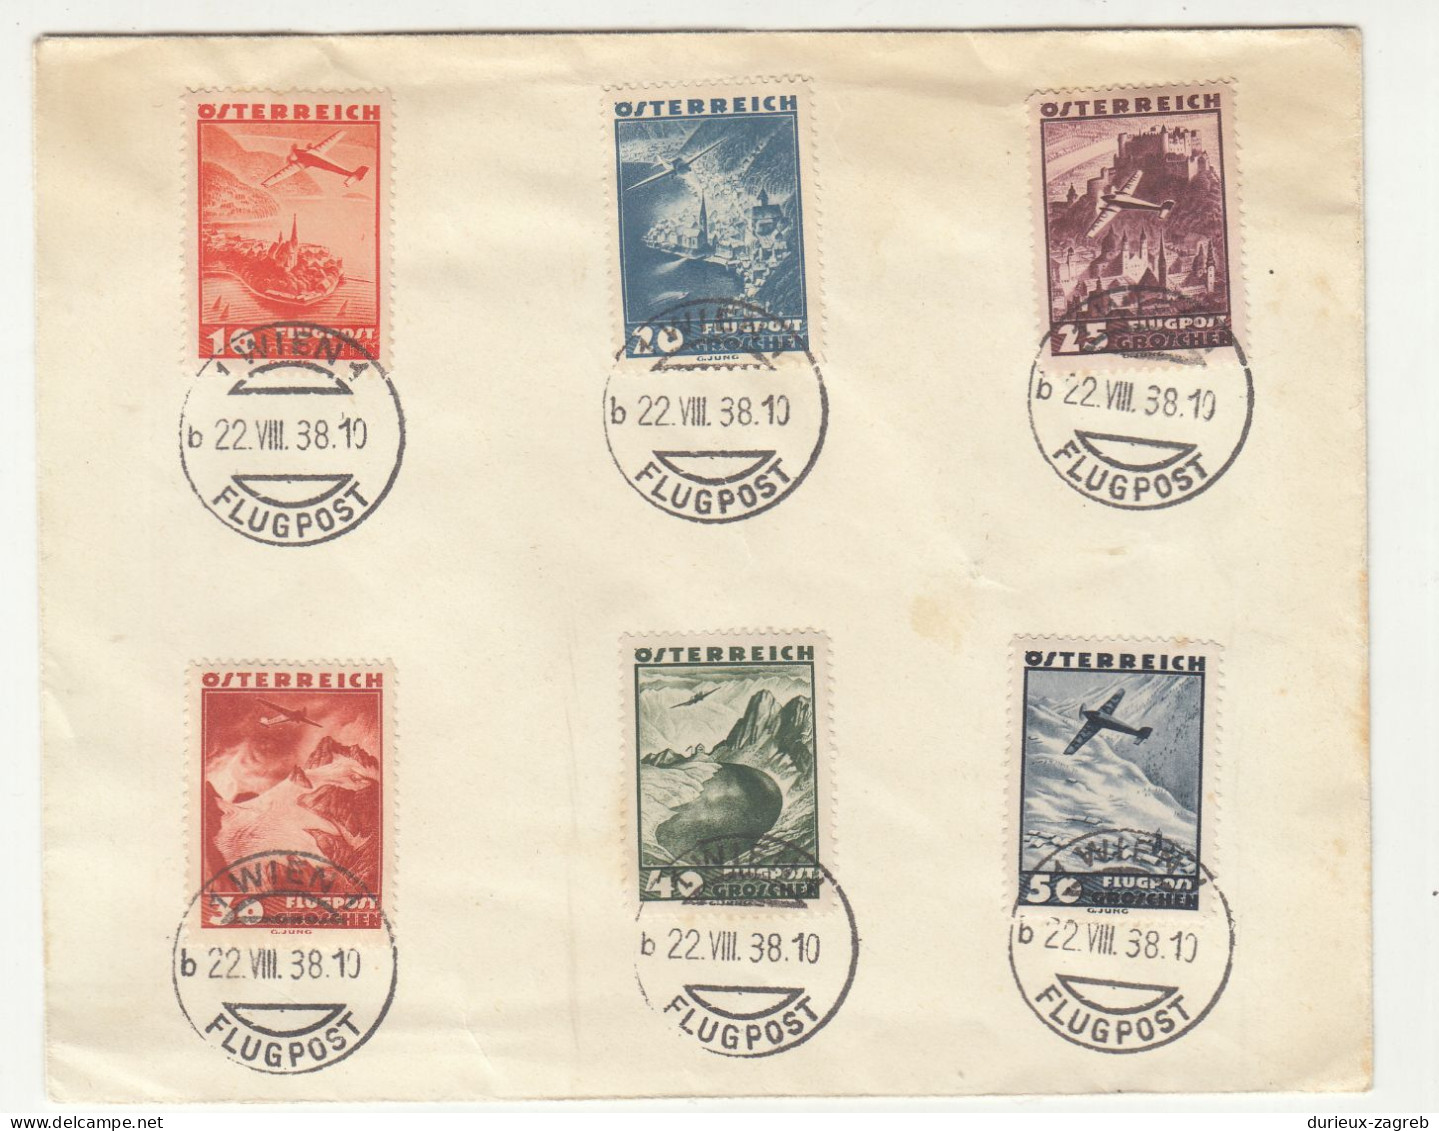 Austria 1938 Air Mail Stamps Postmarked On Letter Cover Not Posted B240401 - Oblitérés